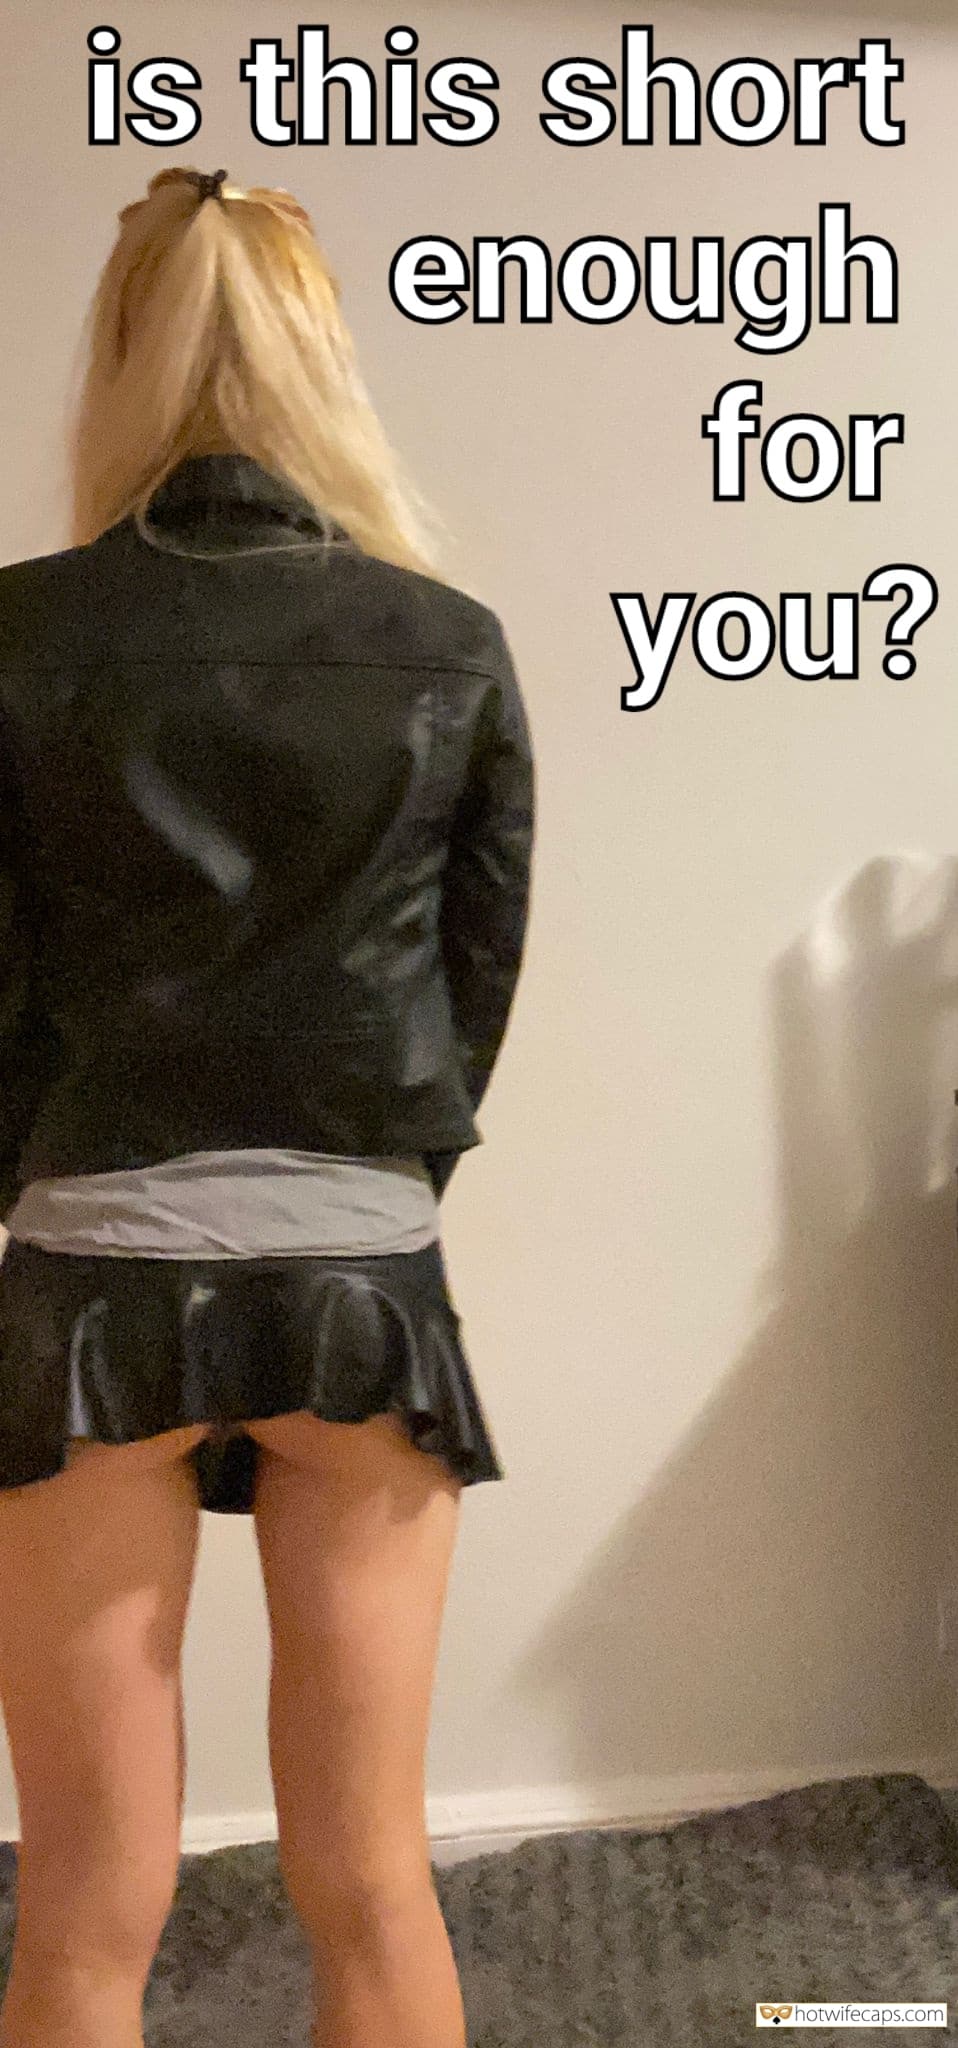 No Panties Getting Ready Dirty Talk Challenges and Rules hotwife caption: is this short enough for you? mini skirt slut caption Petite Blonde in Latex Mini Skirt – No Panties for Easy Access